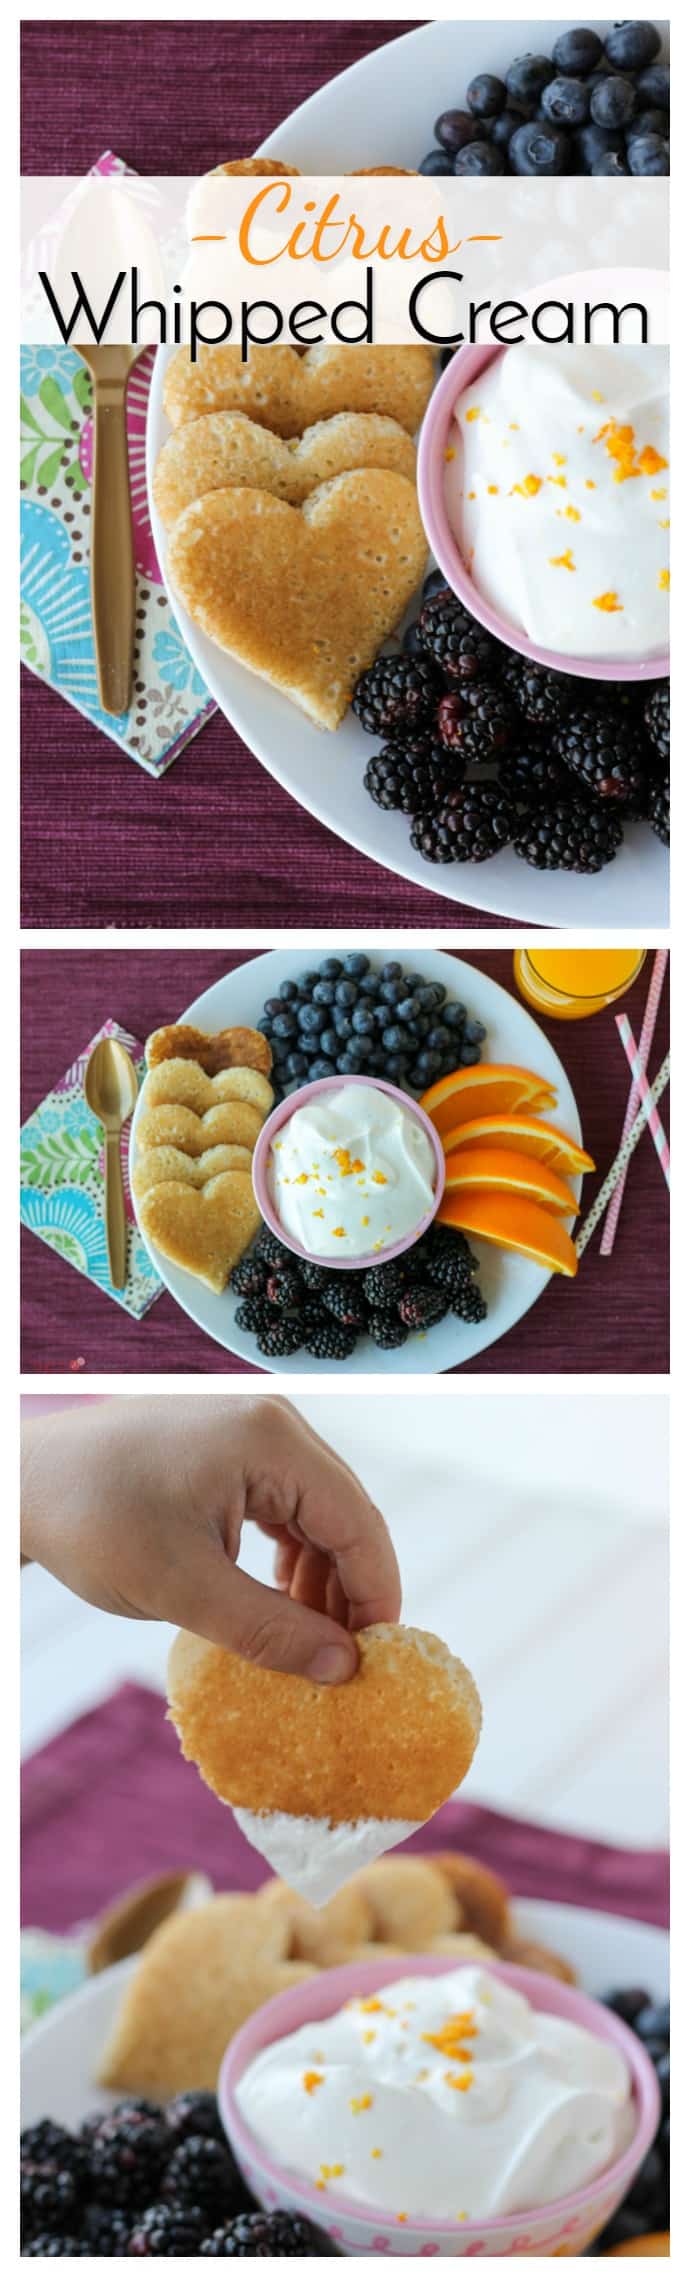 The citrus makes this citrus whipped cream taste bright and goes really well with fresh fruit and pancakes. Also good with dessert! via @nmburk